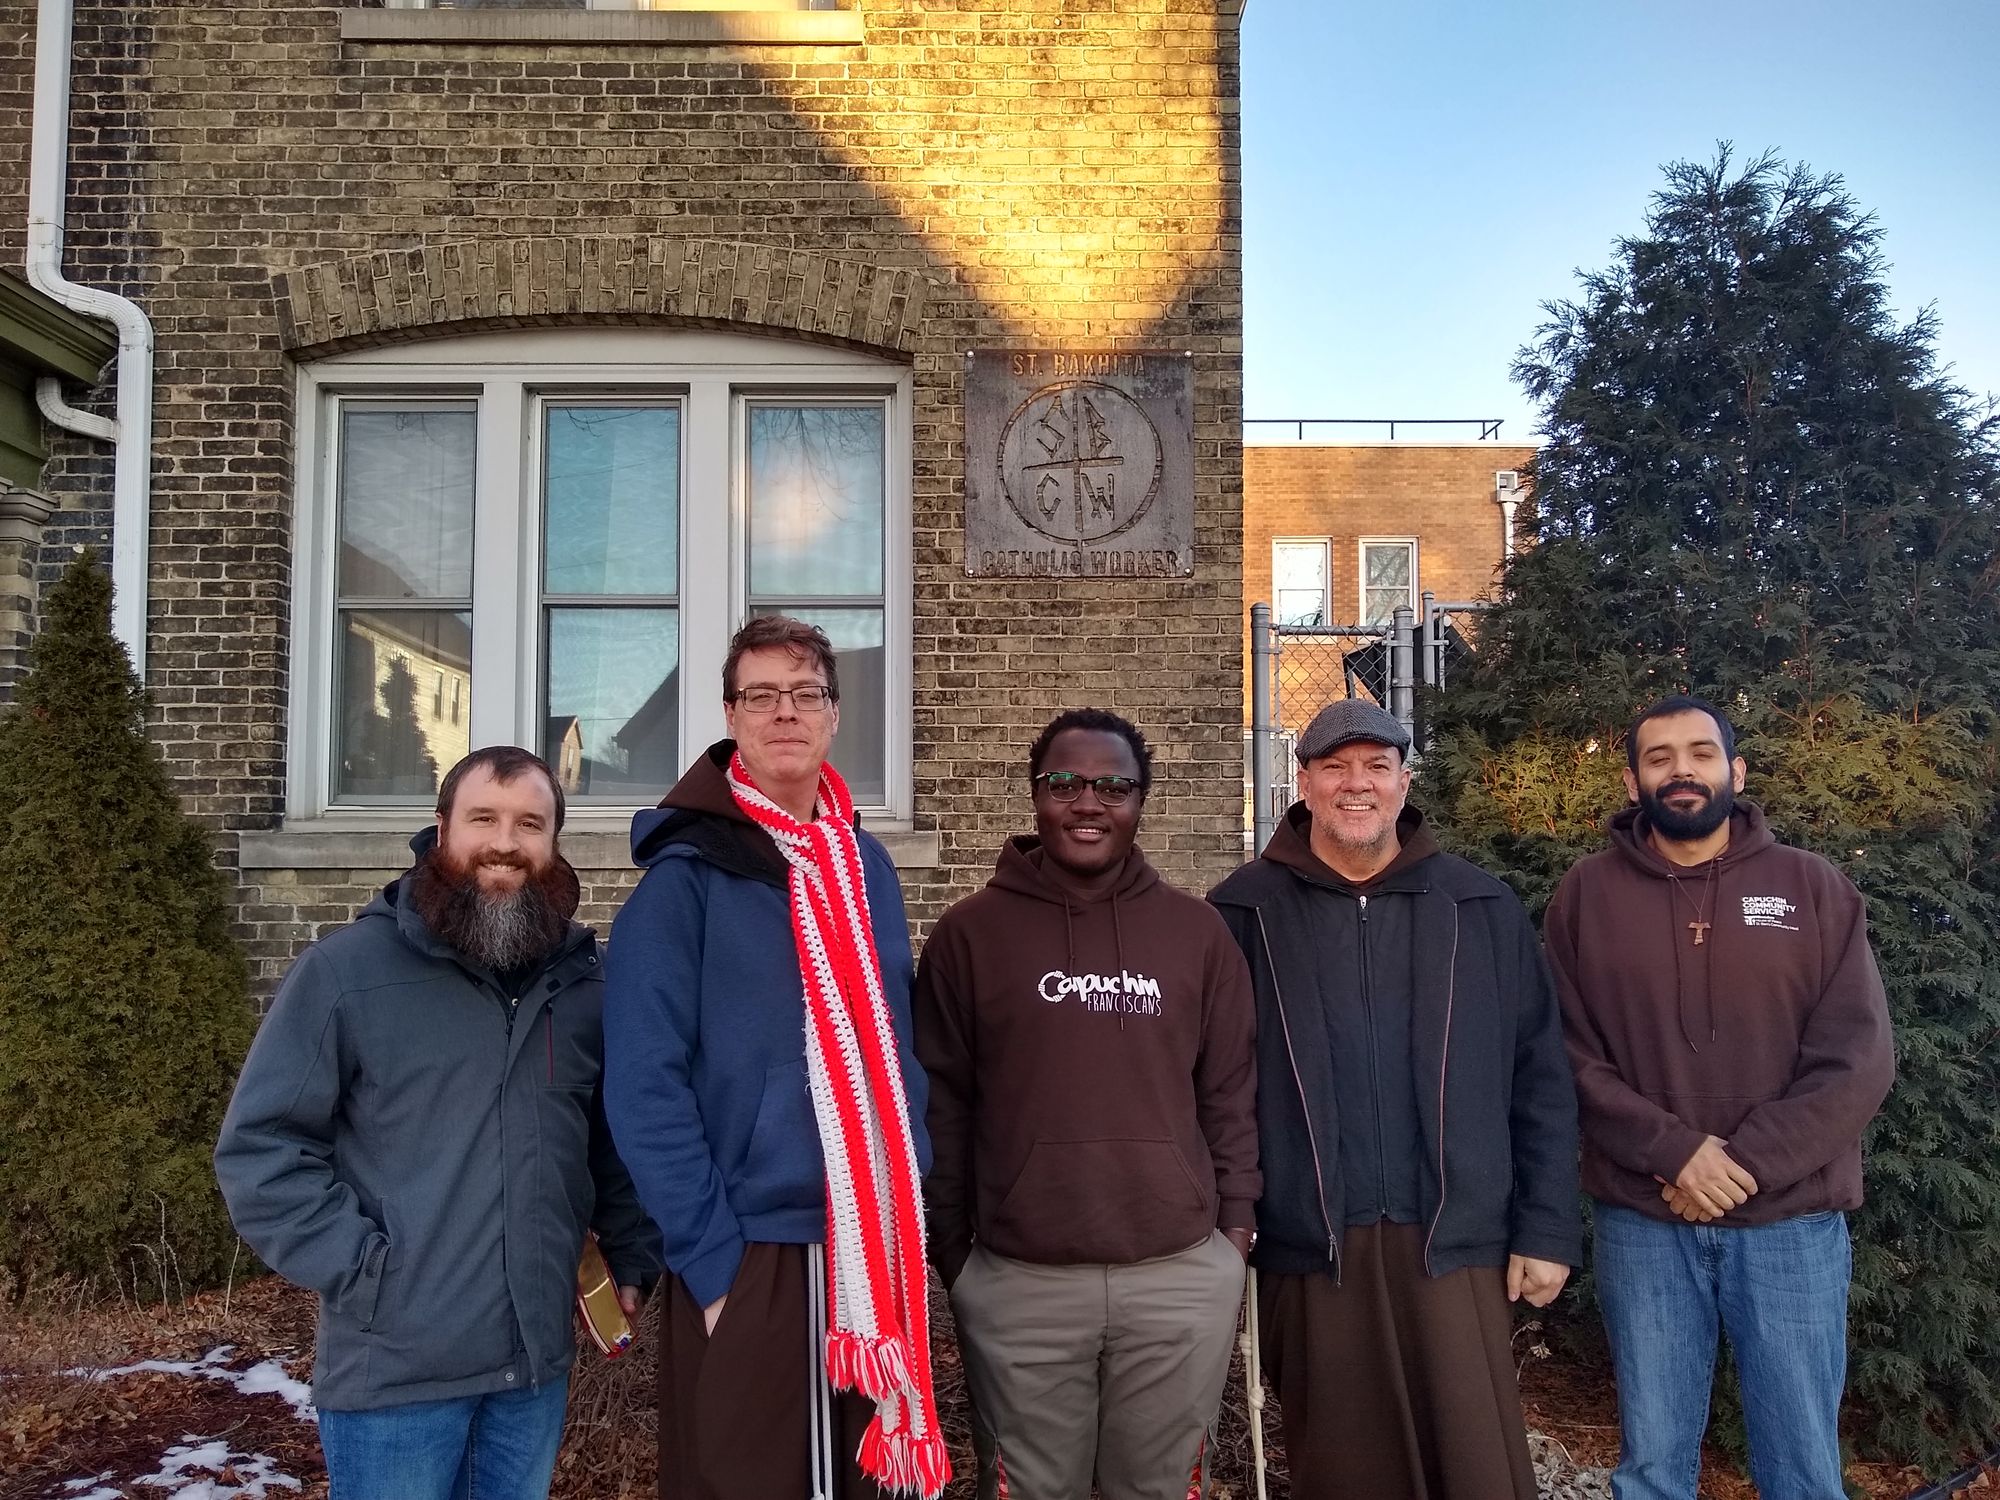 Capuchin postulants, Br. David Hirt and Br. Celestino Aria, Delegate to the Capuchin General Minister for the North American Pacific Capuchin Conference outside the St. Bakhita Catholic Worker House in Milwaukee.